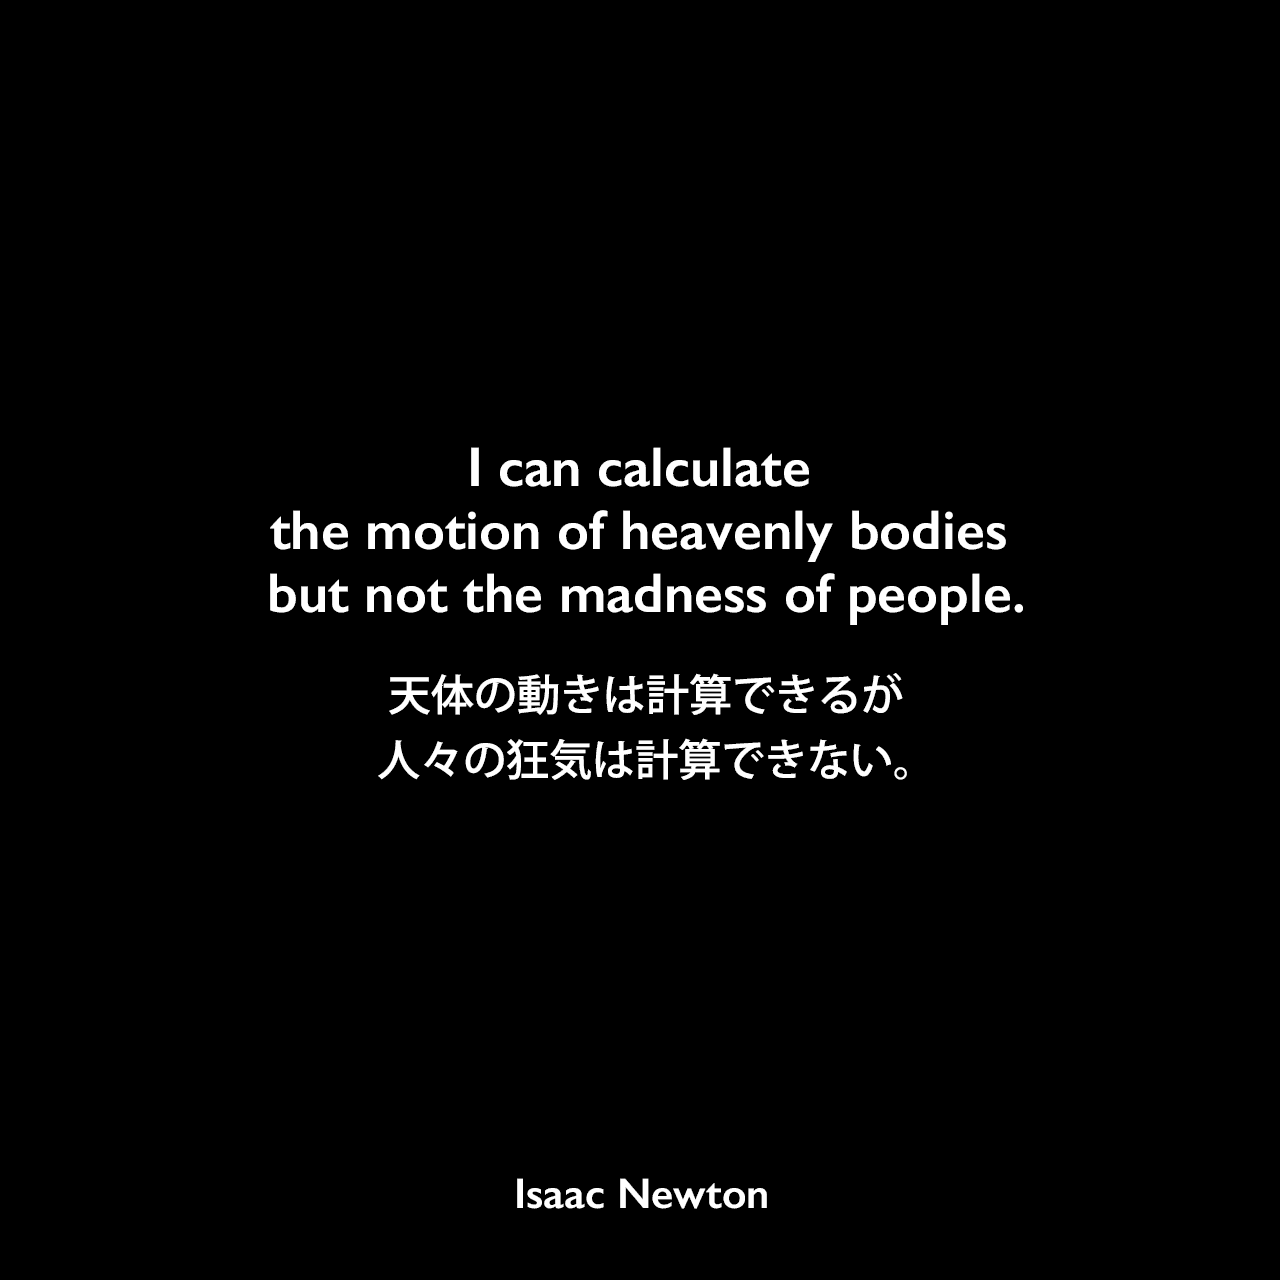 I can calculate the motion of heavenly bodies but not the madness of people.天体の動きは計算できるが、人々の狂気は計算できない。Isaac Newton